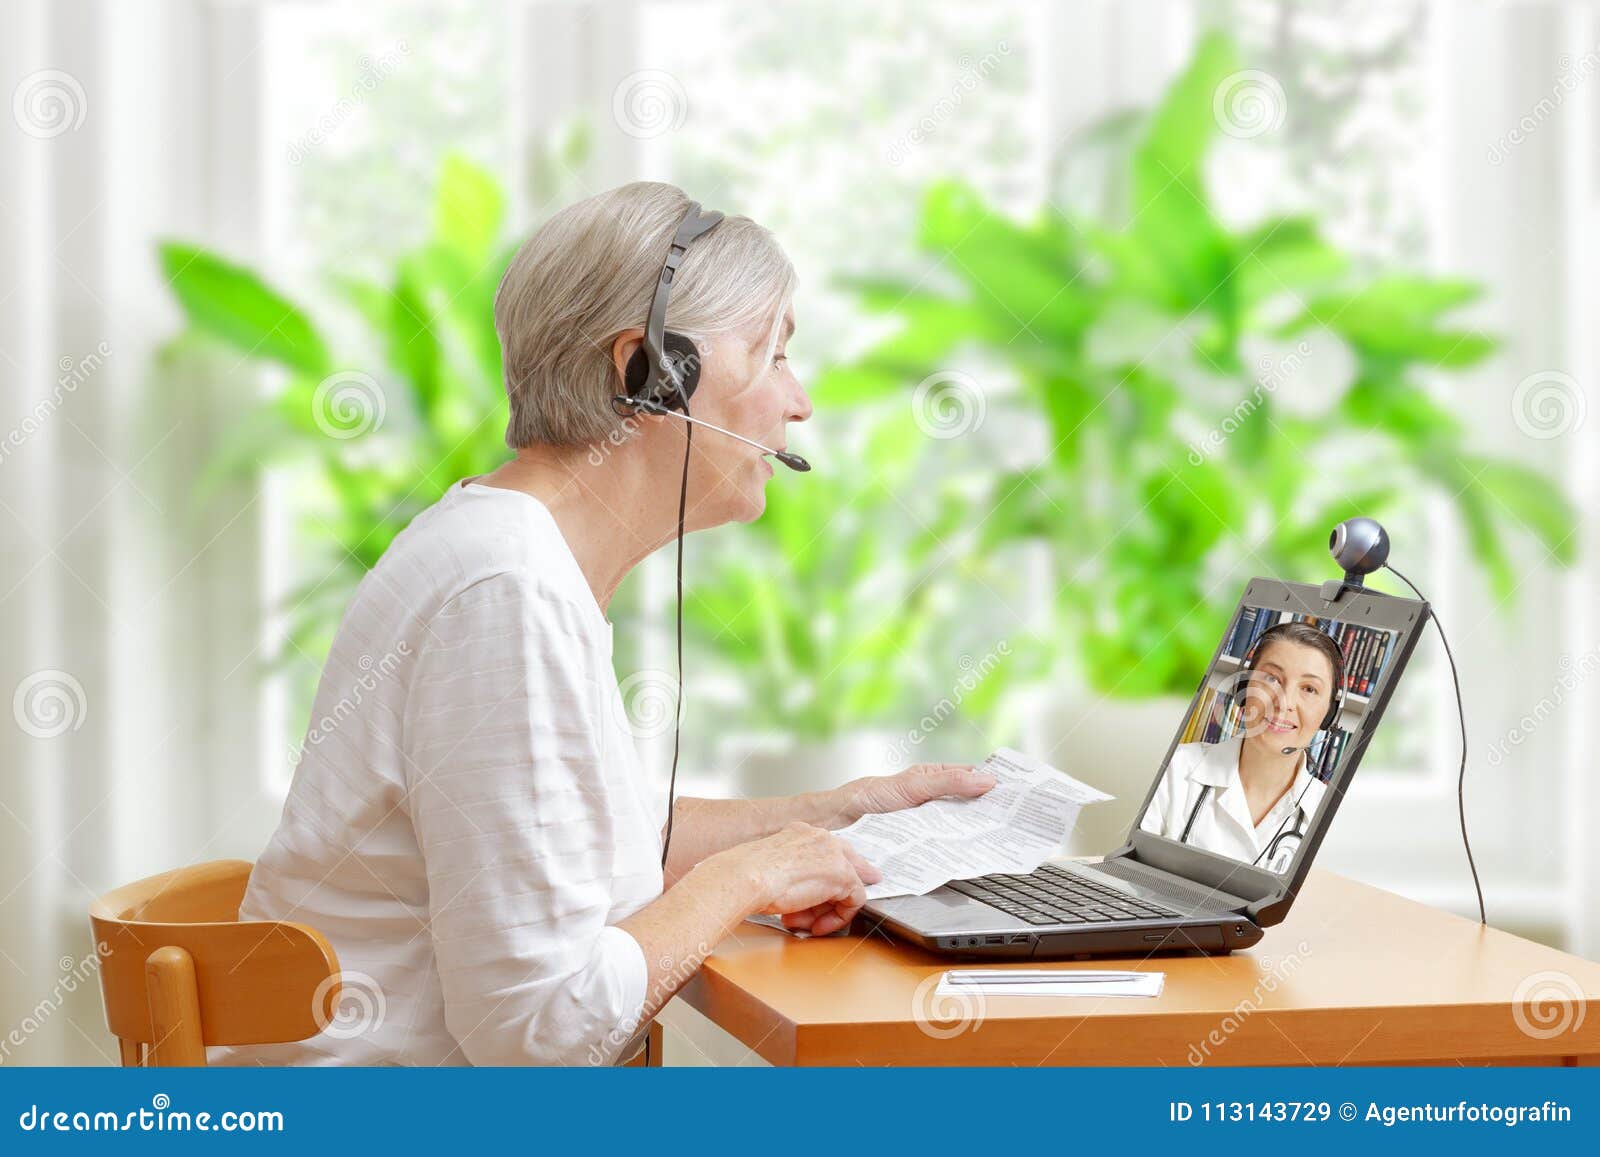 woman doctor video call instruction leaflet